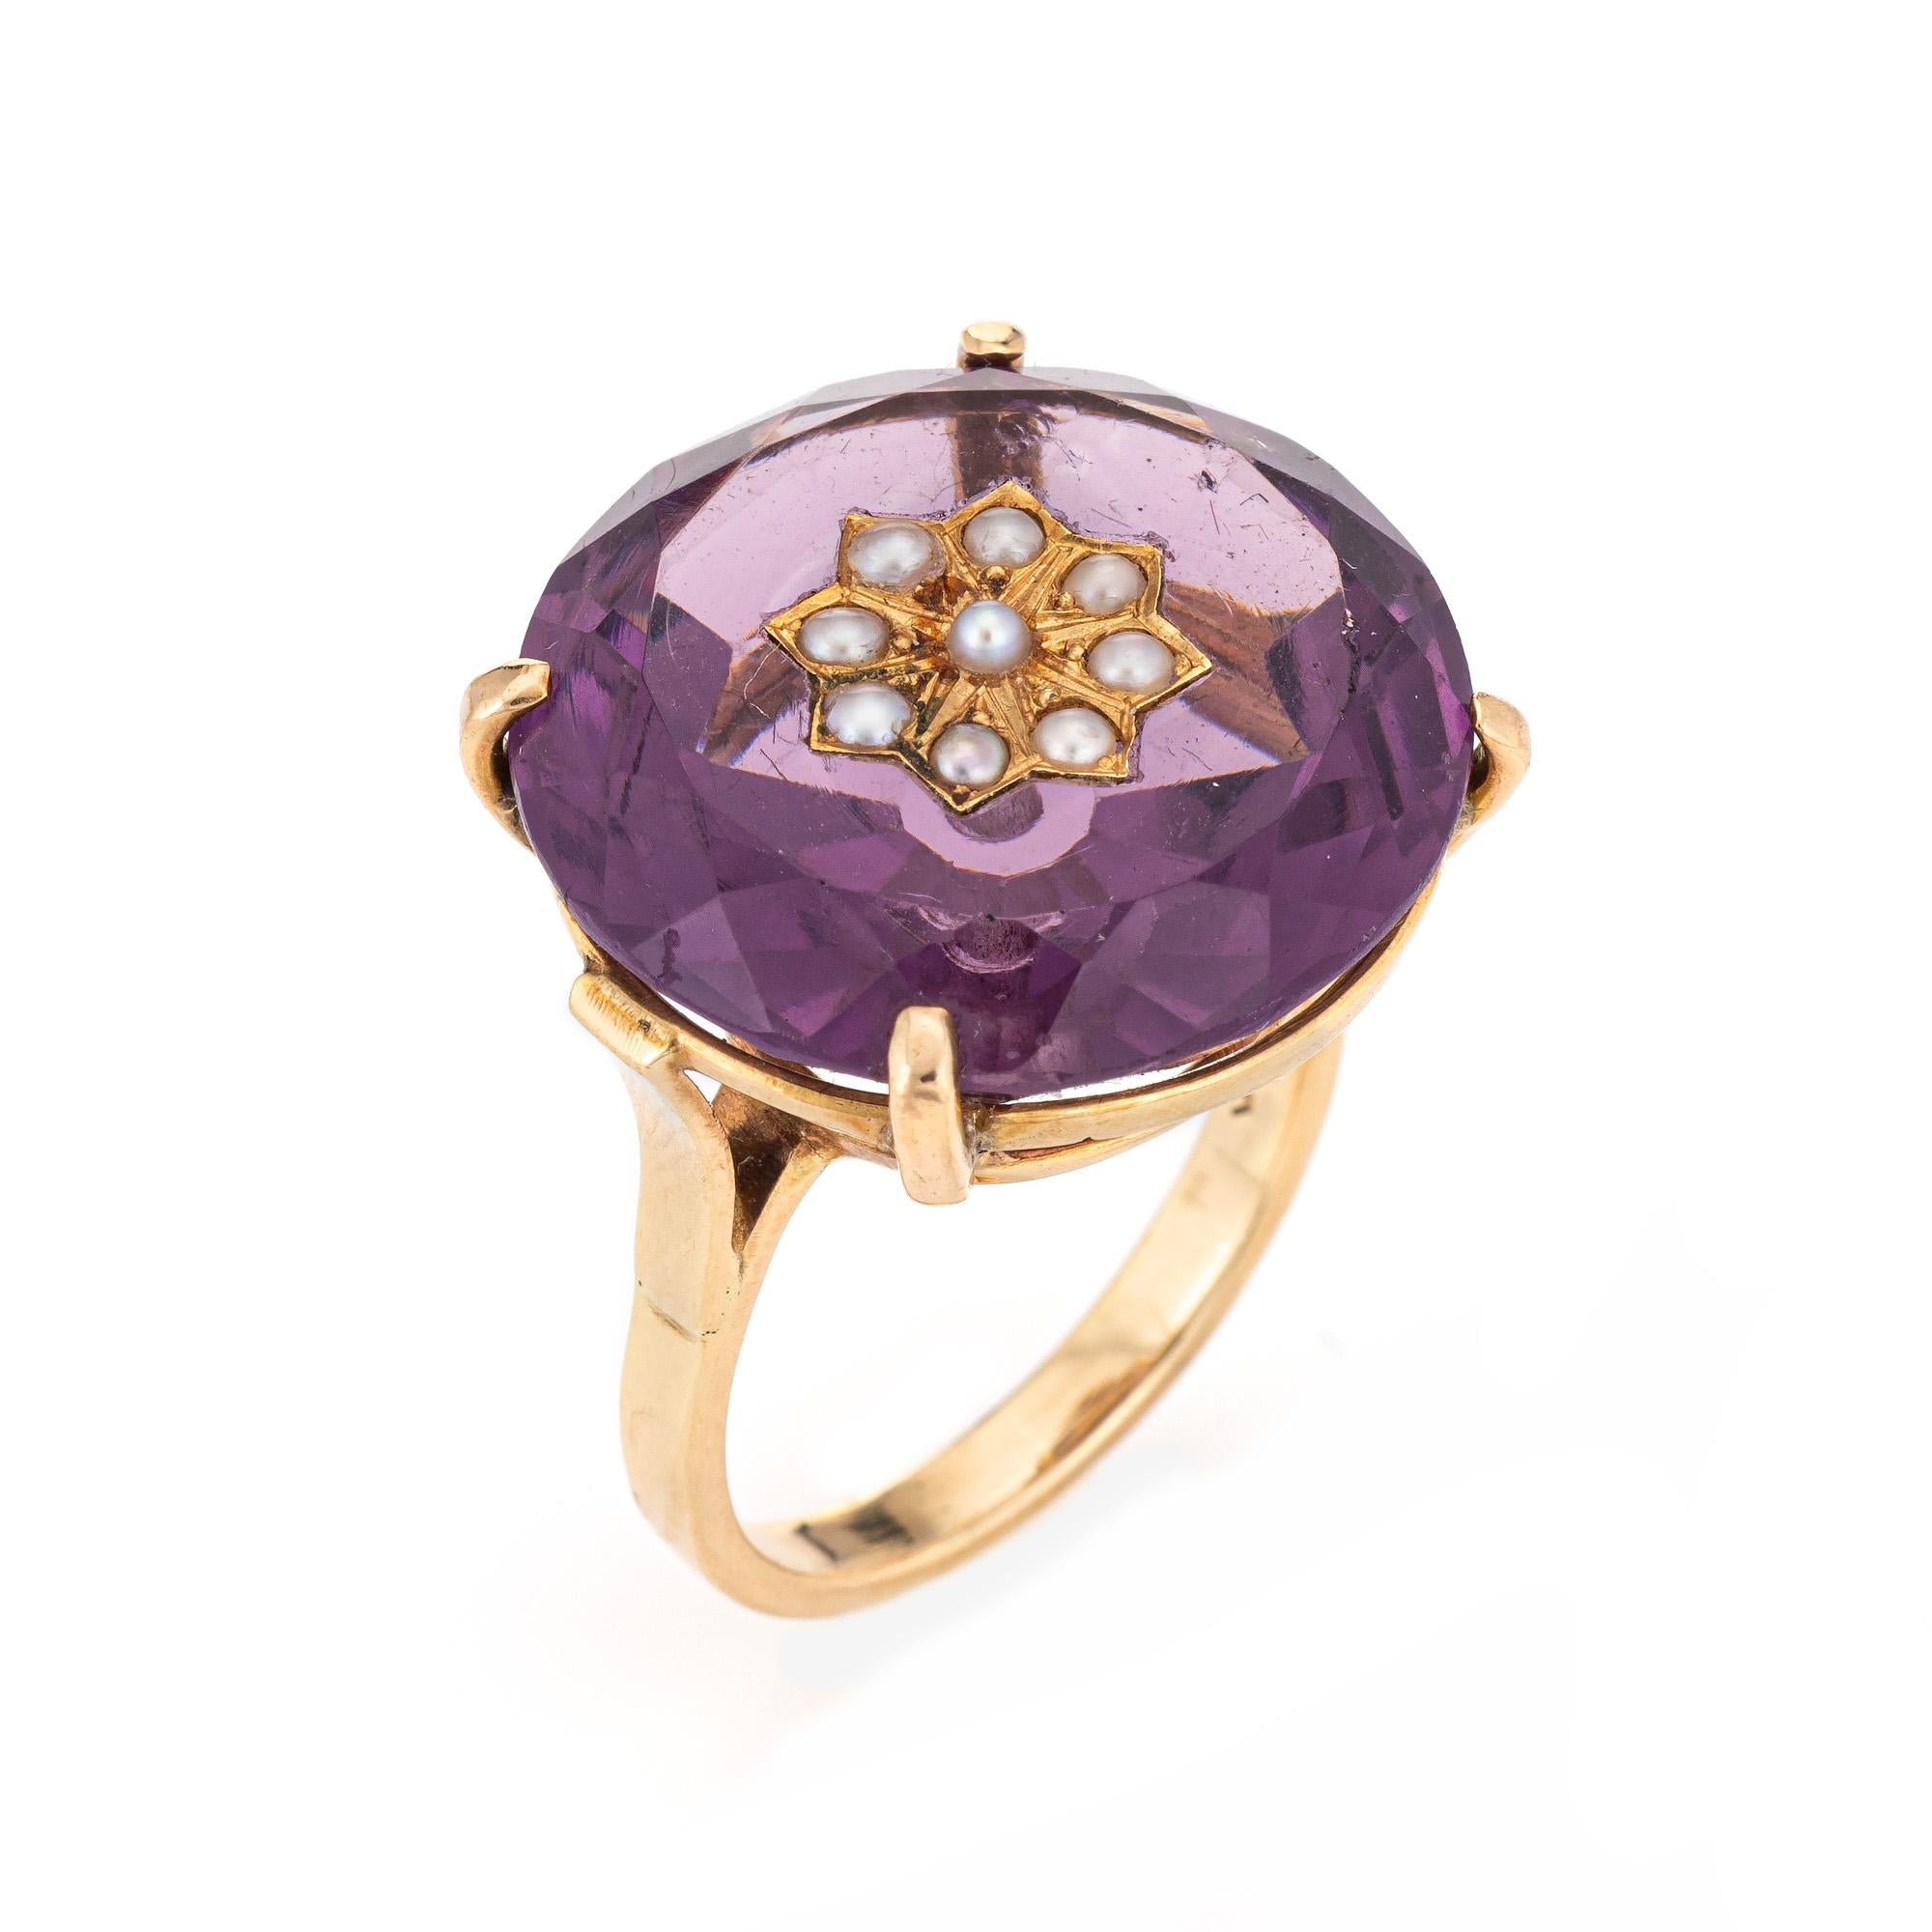 Stylish vintage amethyst & seed pearl ring (circa 1950s to 1960s) crafted in 14 karat yellow gold. 

Round faceted amethyst measures 21mm diameter (estimated at 23 carats). The 9 seed pearls each measure 1.5mm. The amethyst is in very good condition